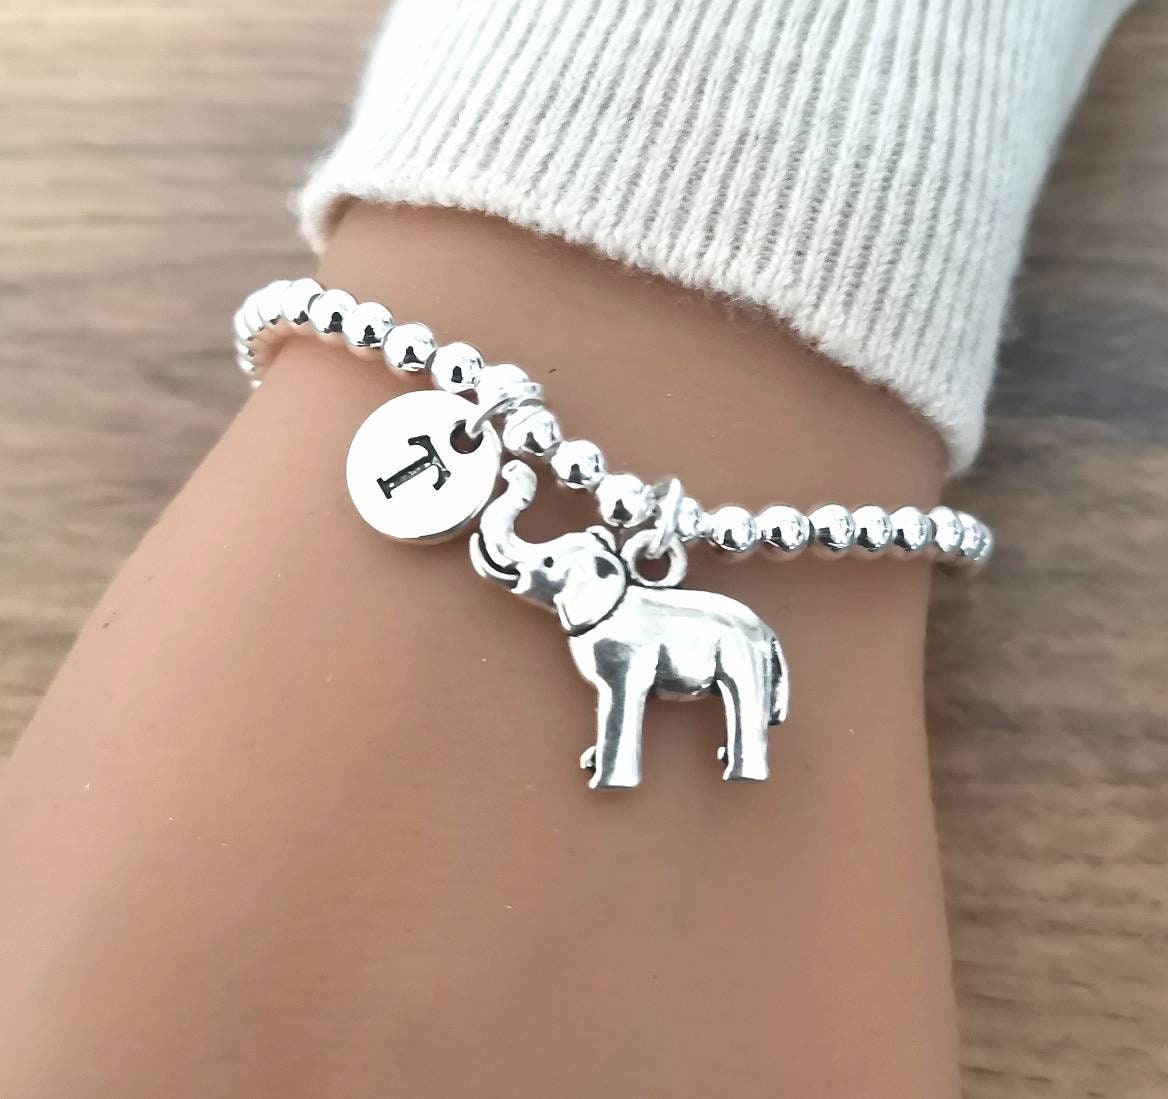 Gifts for her, gifts for women, gifts for friends, gifts for girlfriend, Women gifts, Gift for her, Elephant gifts, elephant bracelet